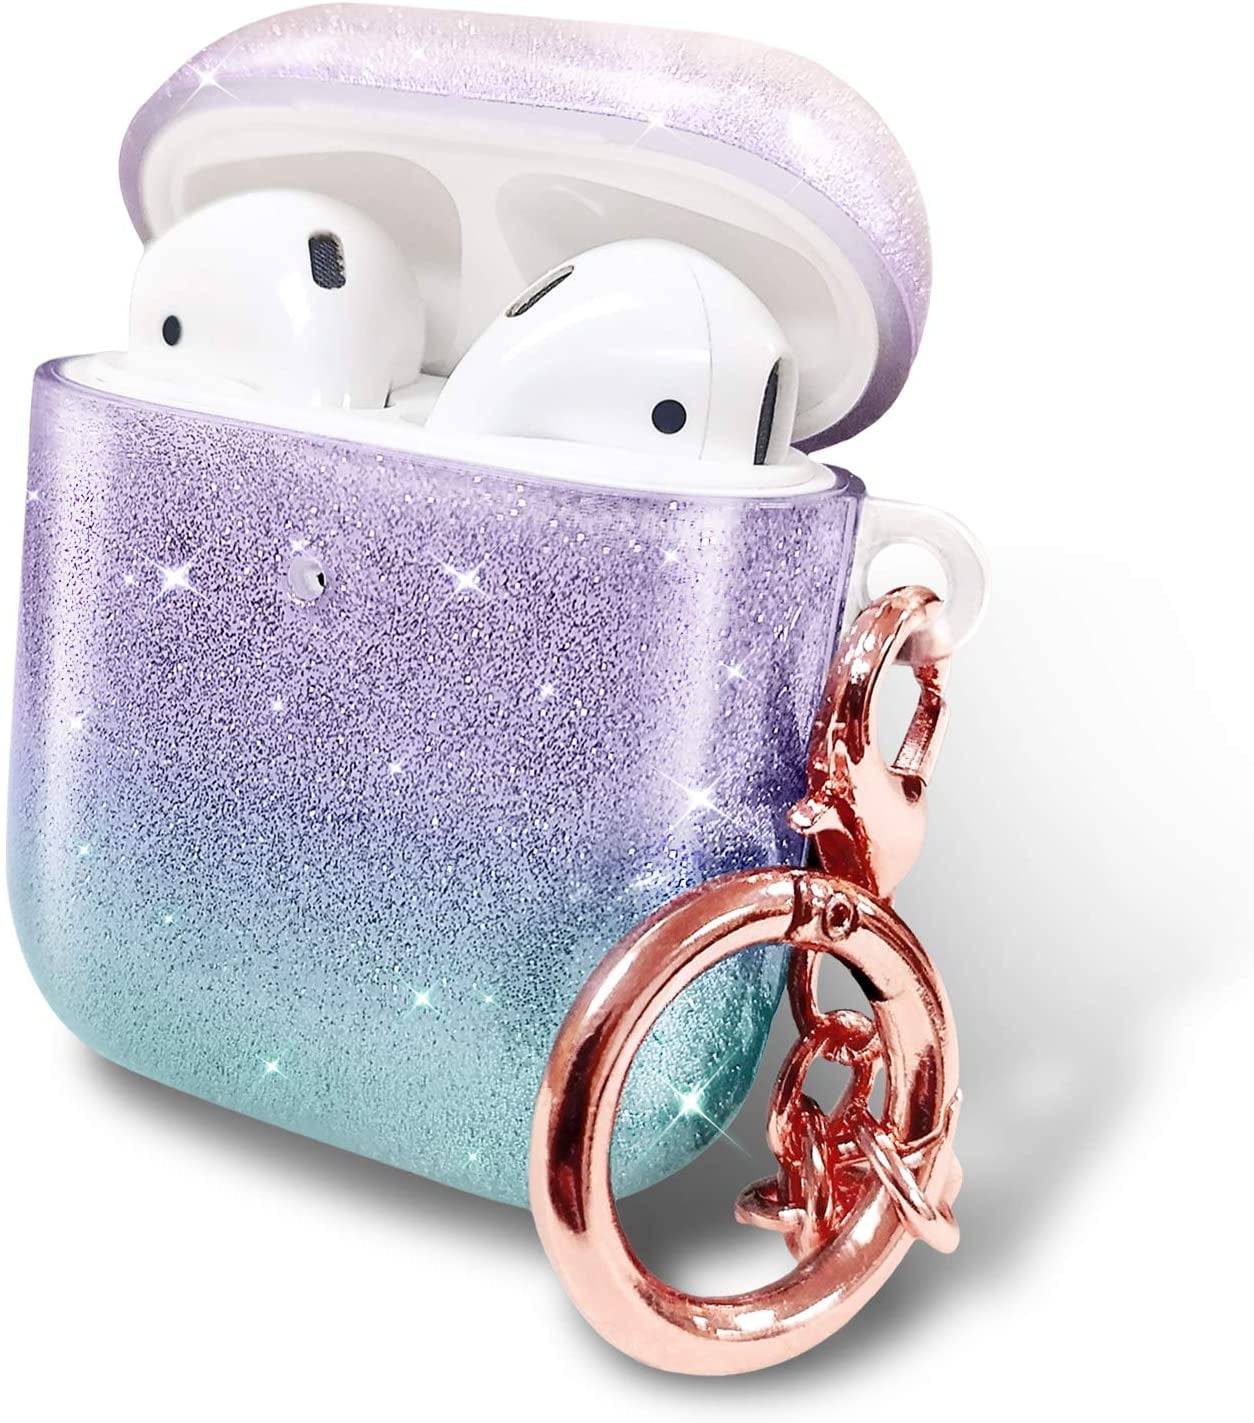 Oqplog for AirPods 2&1 Case Protective Soft Silicone Luxury Cute Fun Fashion Cover for Girls Teens Kids Boys Air Pods Stylish Cool Shockproof Design Skin Accessories Cases for Airpod 1/2-350 Box 